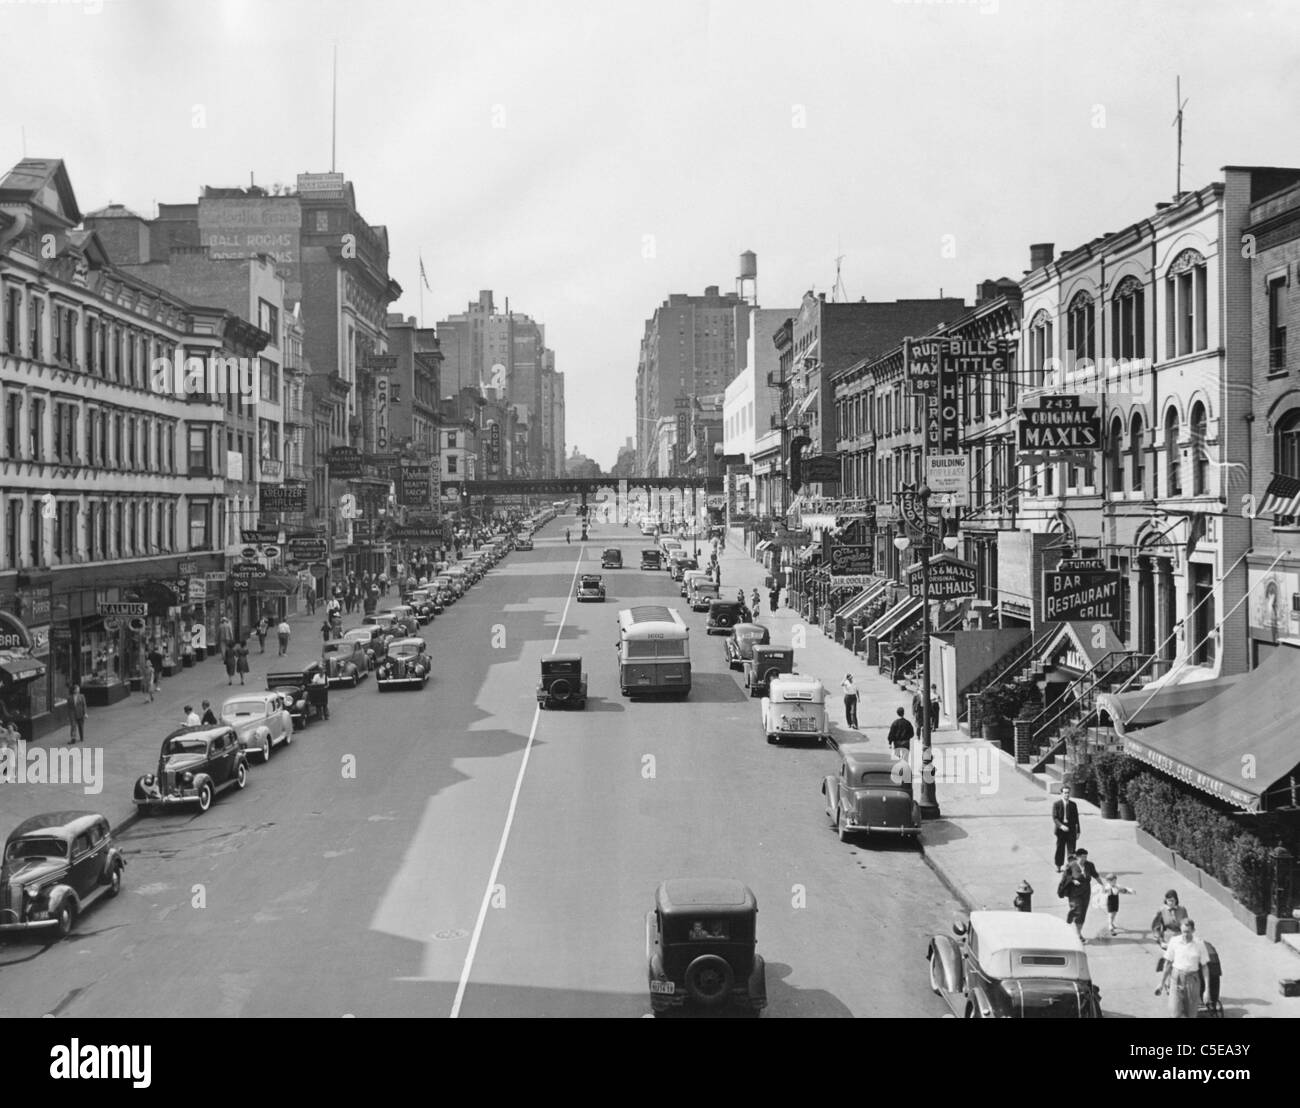 Cityscape of E. 86th Street in 1930s New York Stock Photo